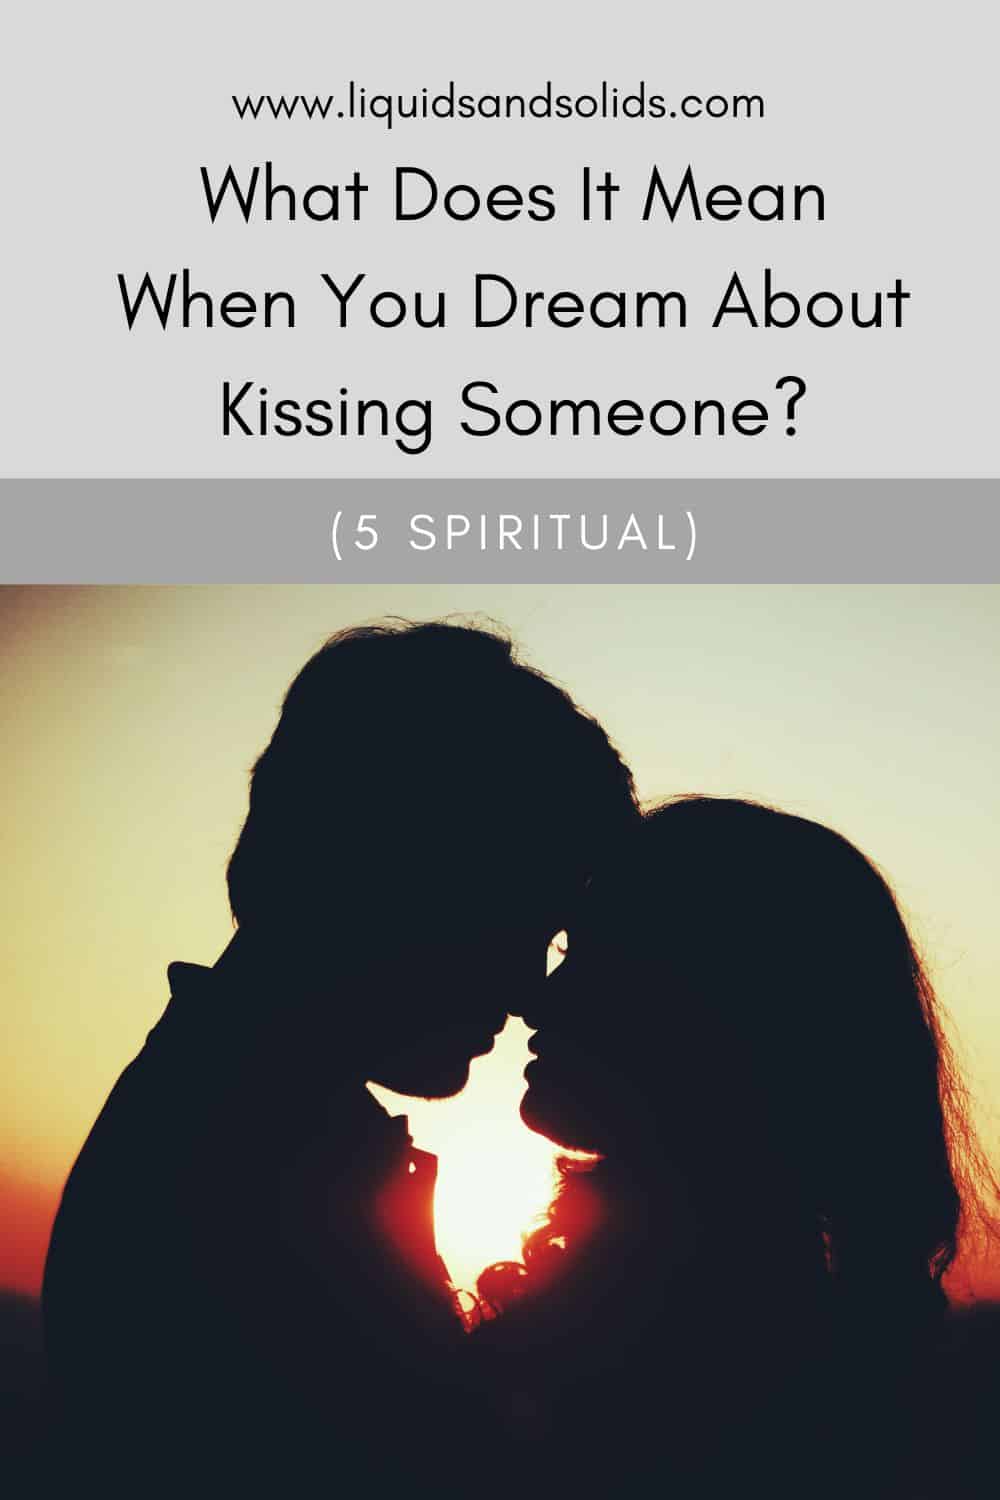 What Does It Mean When You Dream About Kissing Someone? (5 Spiritual)